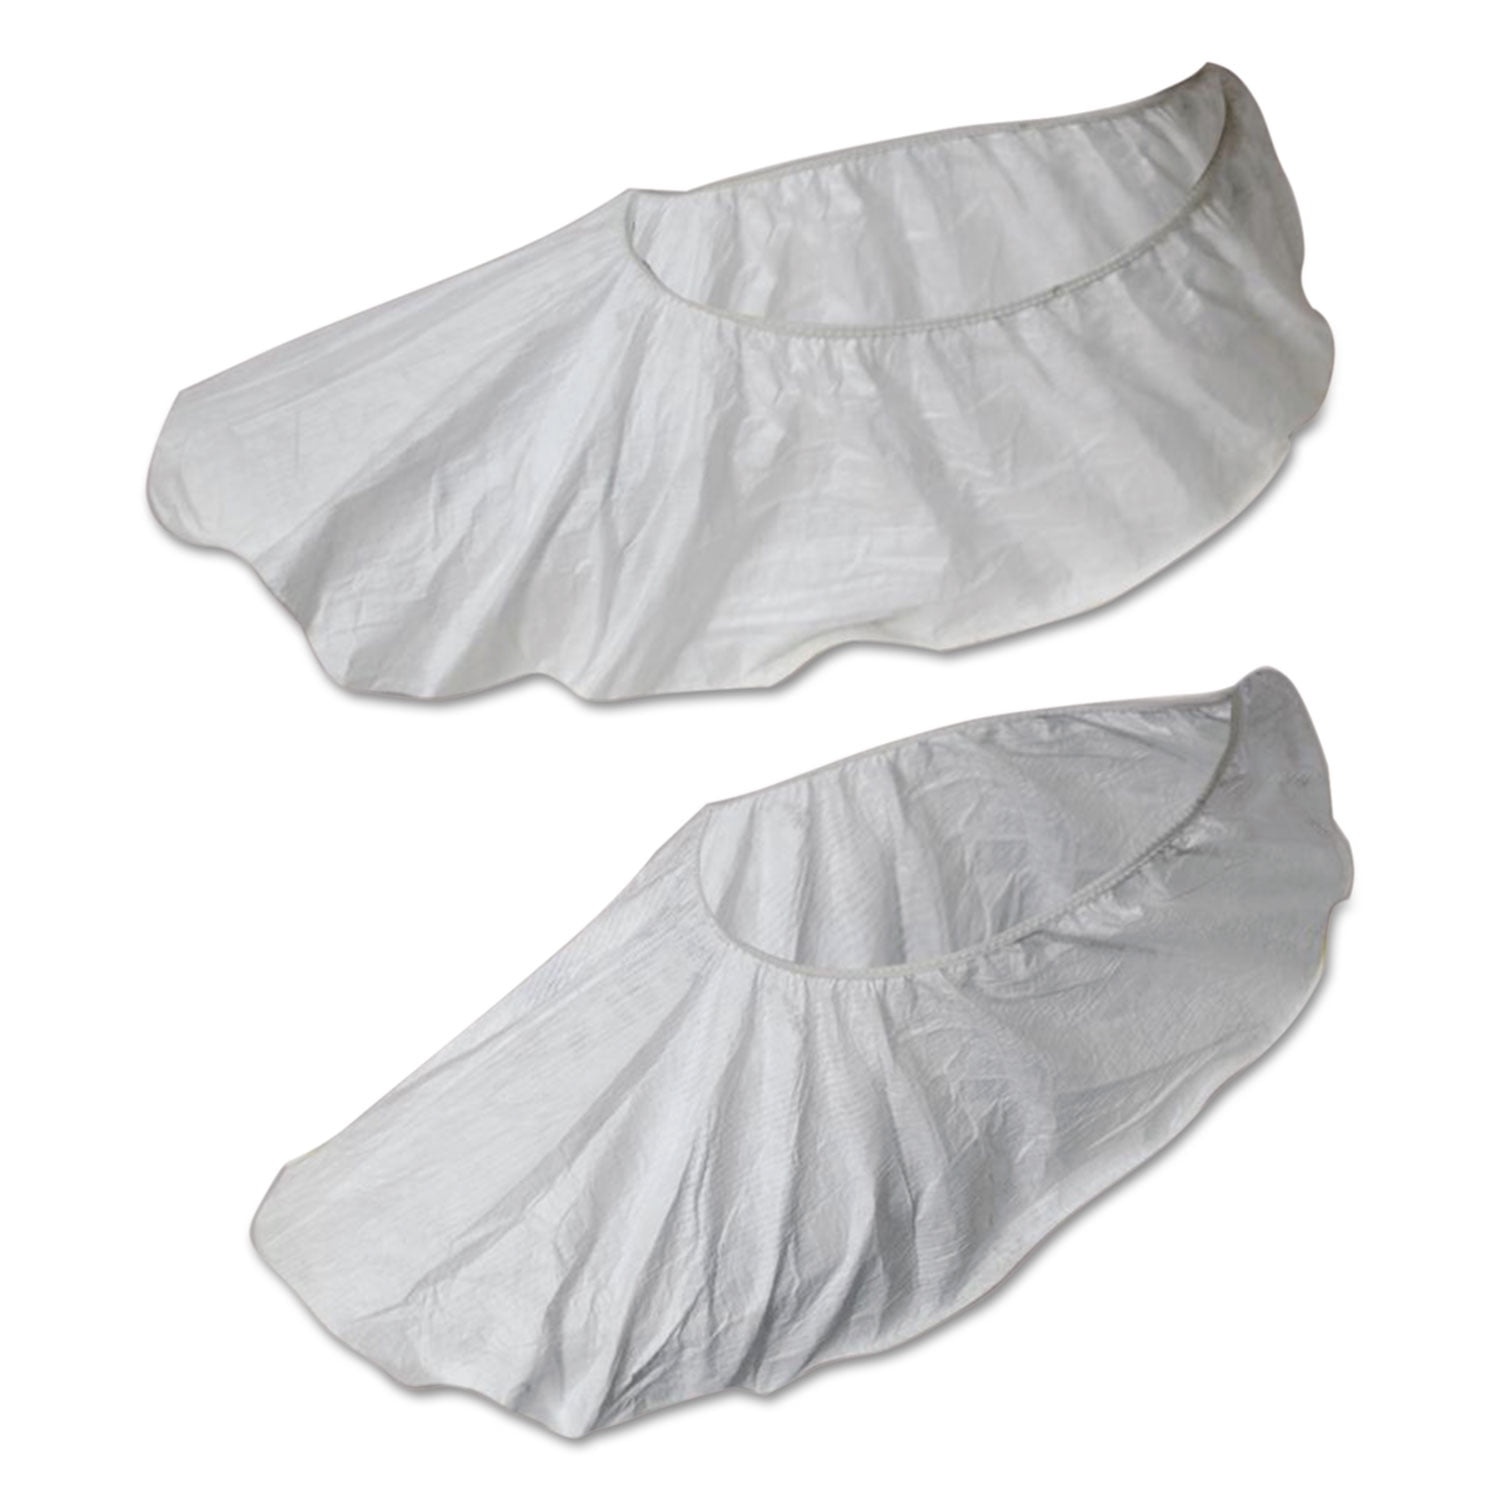 Disposable Shoe Covers, White, Large 